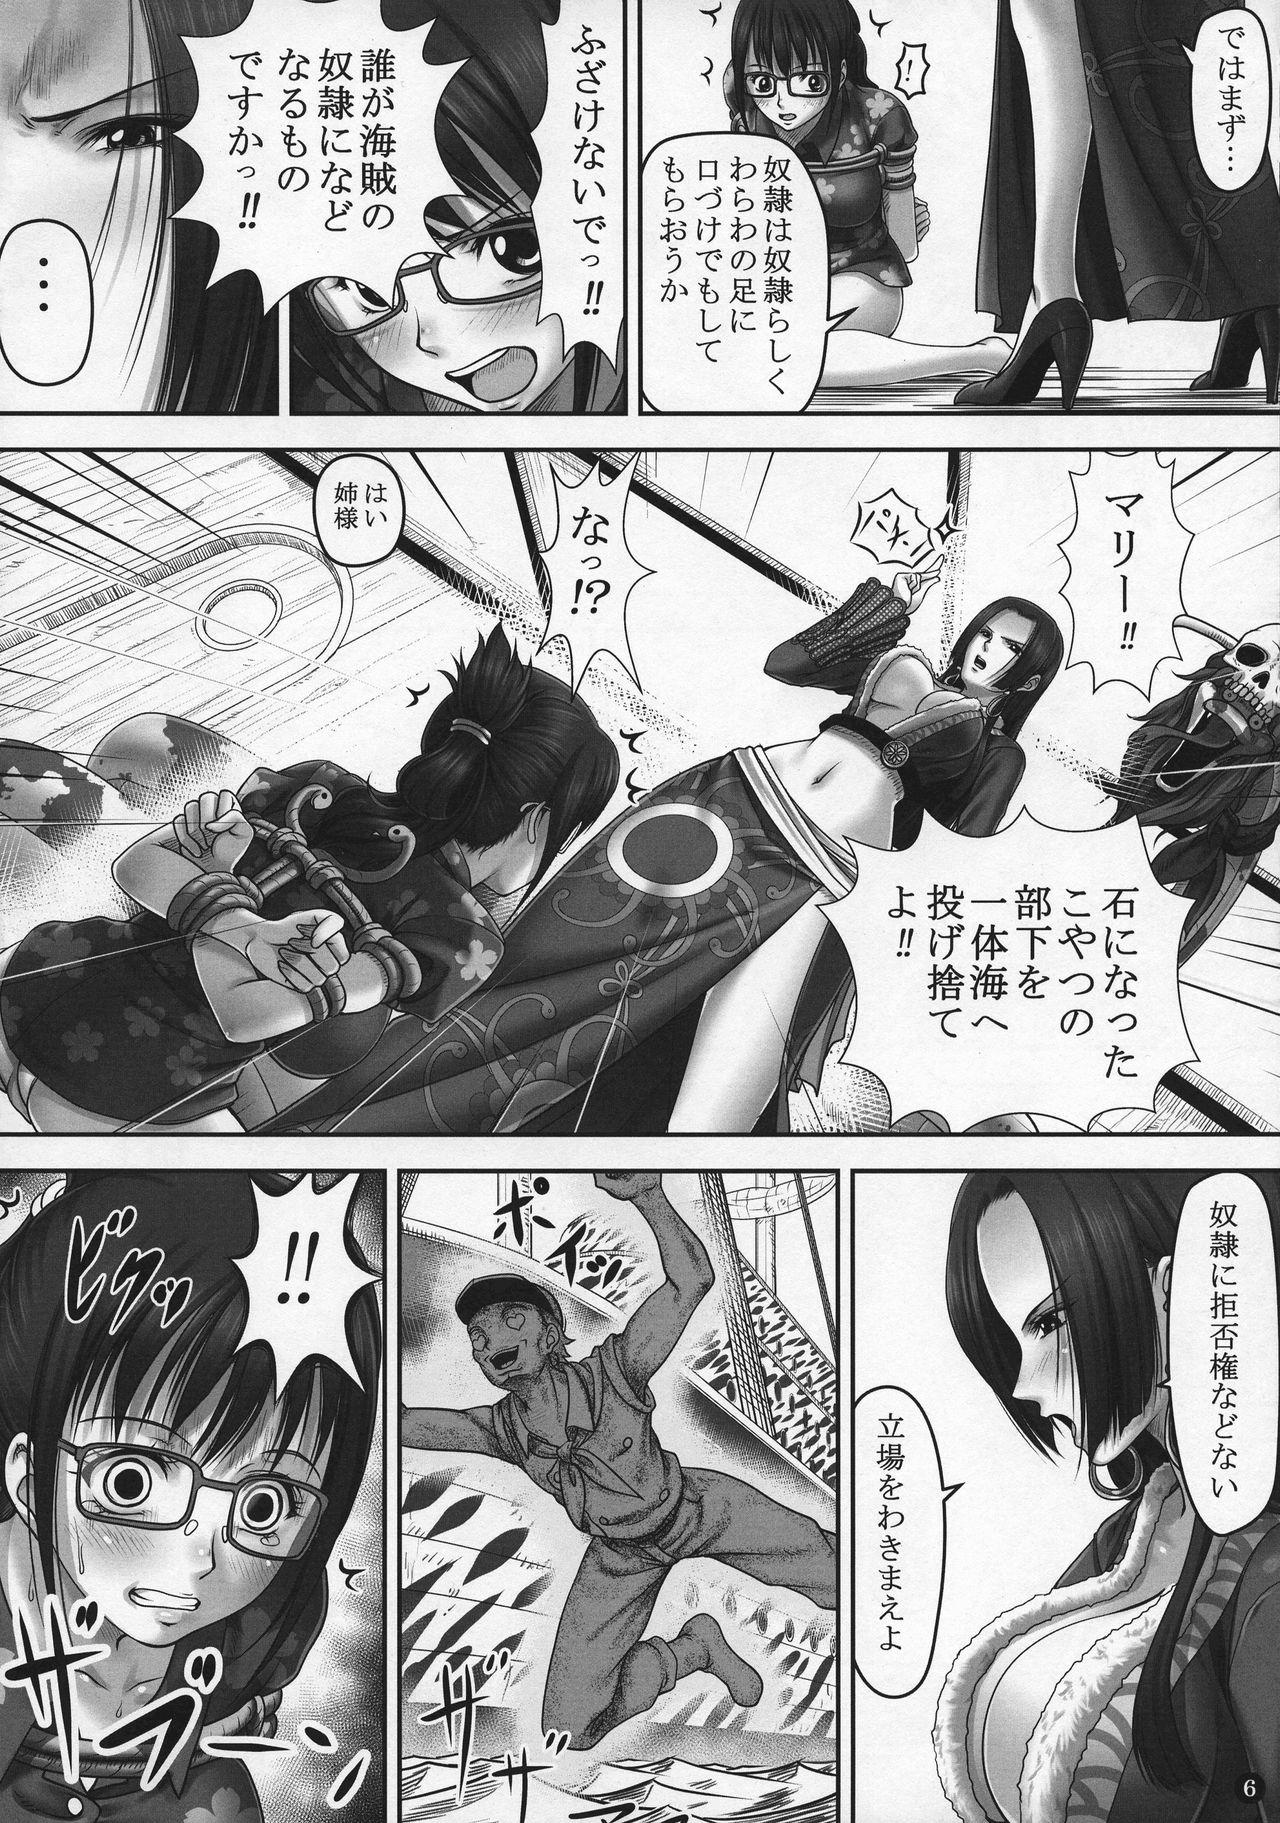 Sucking Cocks Secret Mission - One piece Soloboy - Page 6